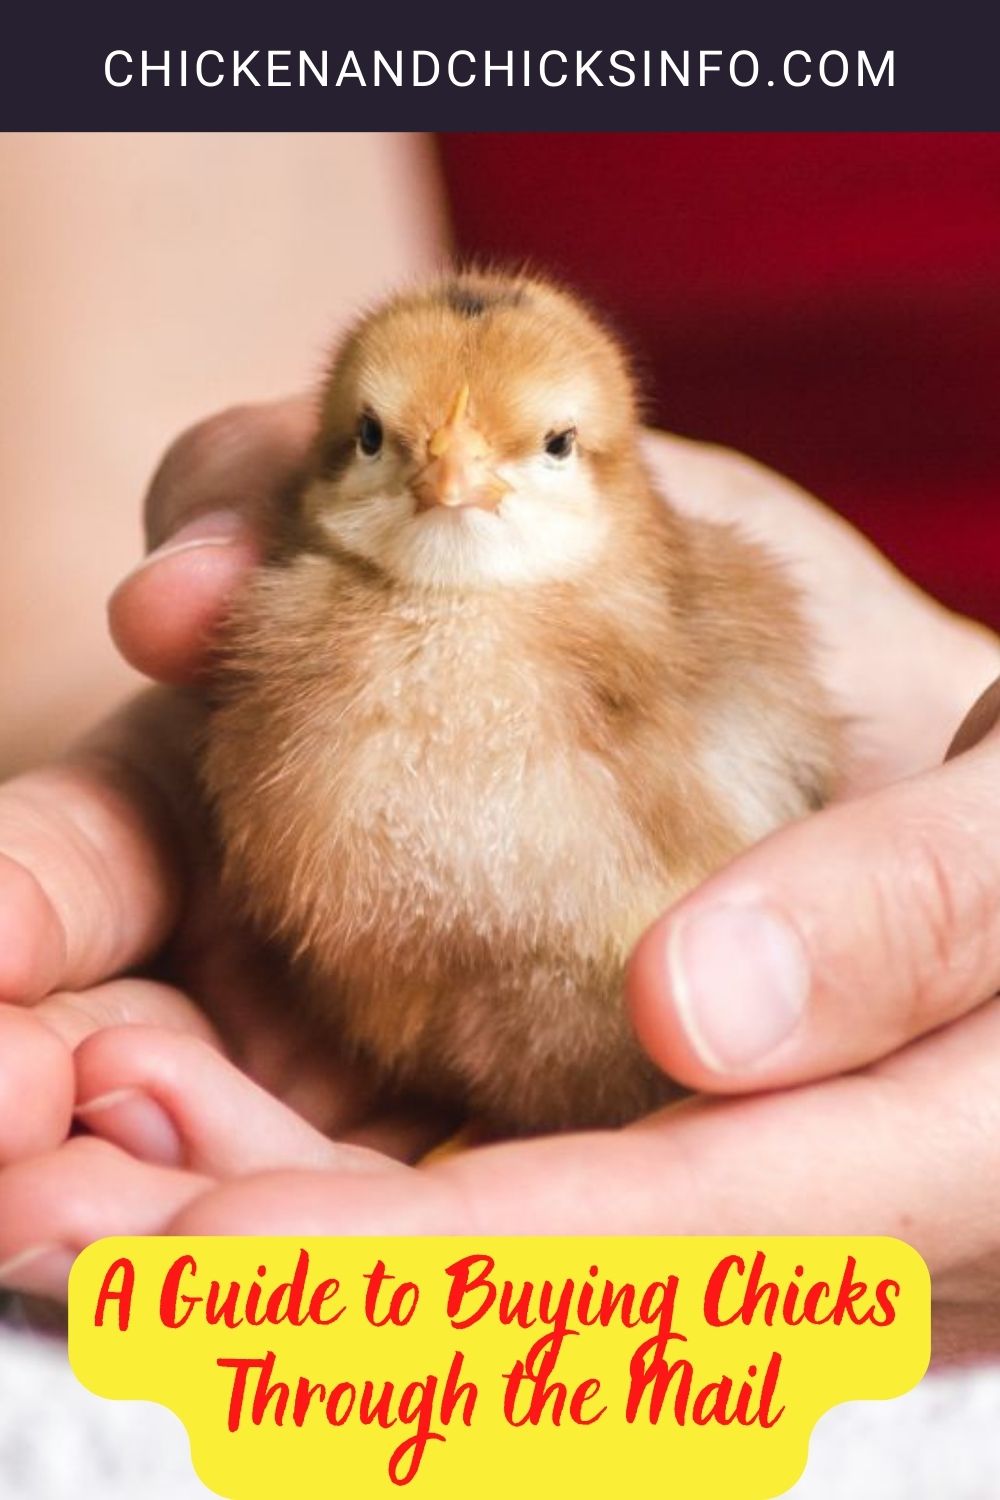 A Guide to Buying Chicks Through the Mail pinterest image.